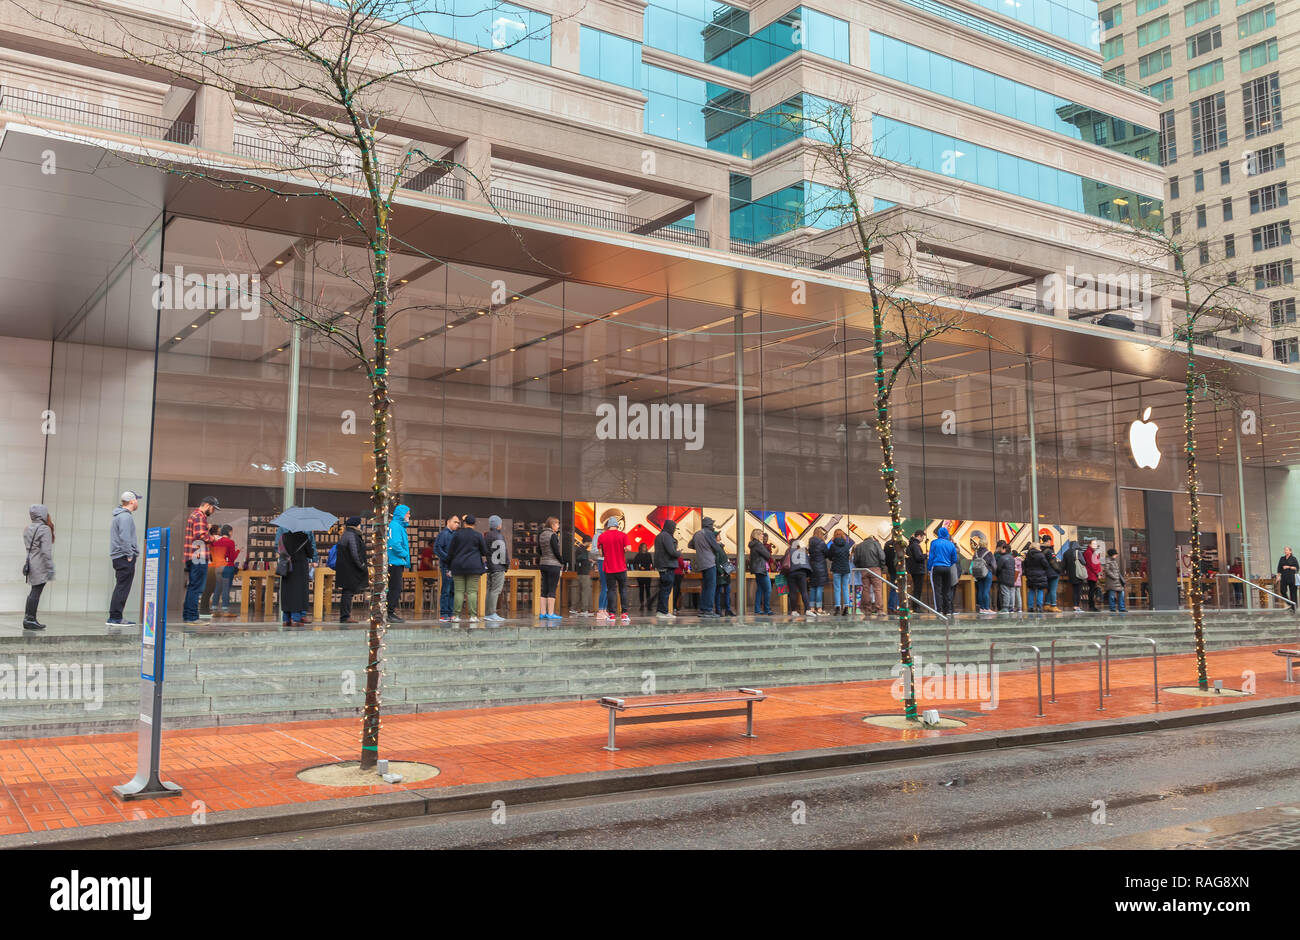 people-are-embracing-the-rain-to-be-in-line-in-front-of-apple-store-in-portland-oregon-for-an-after-christmas-sale-RAG8XN.jpg